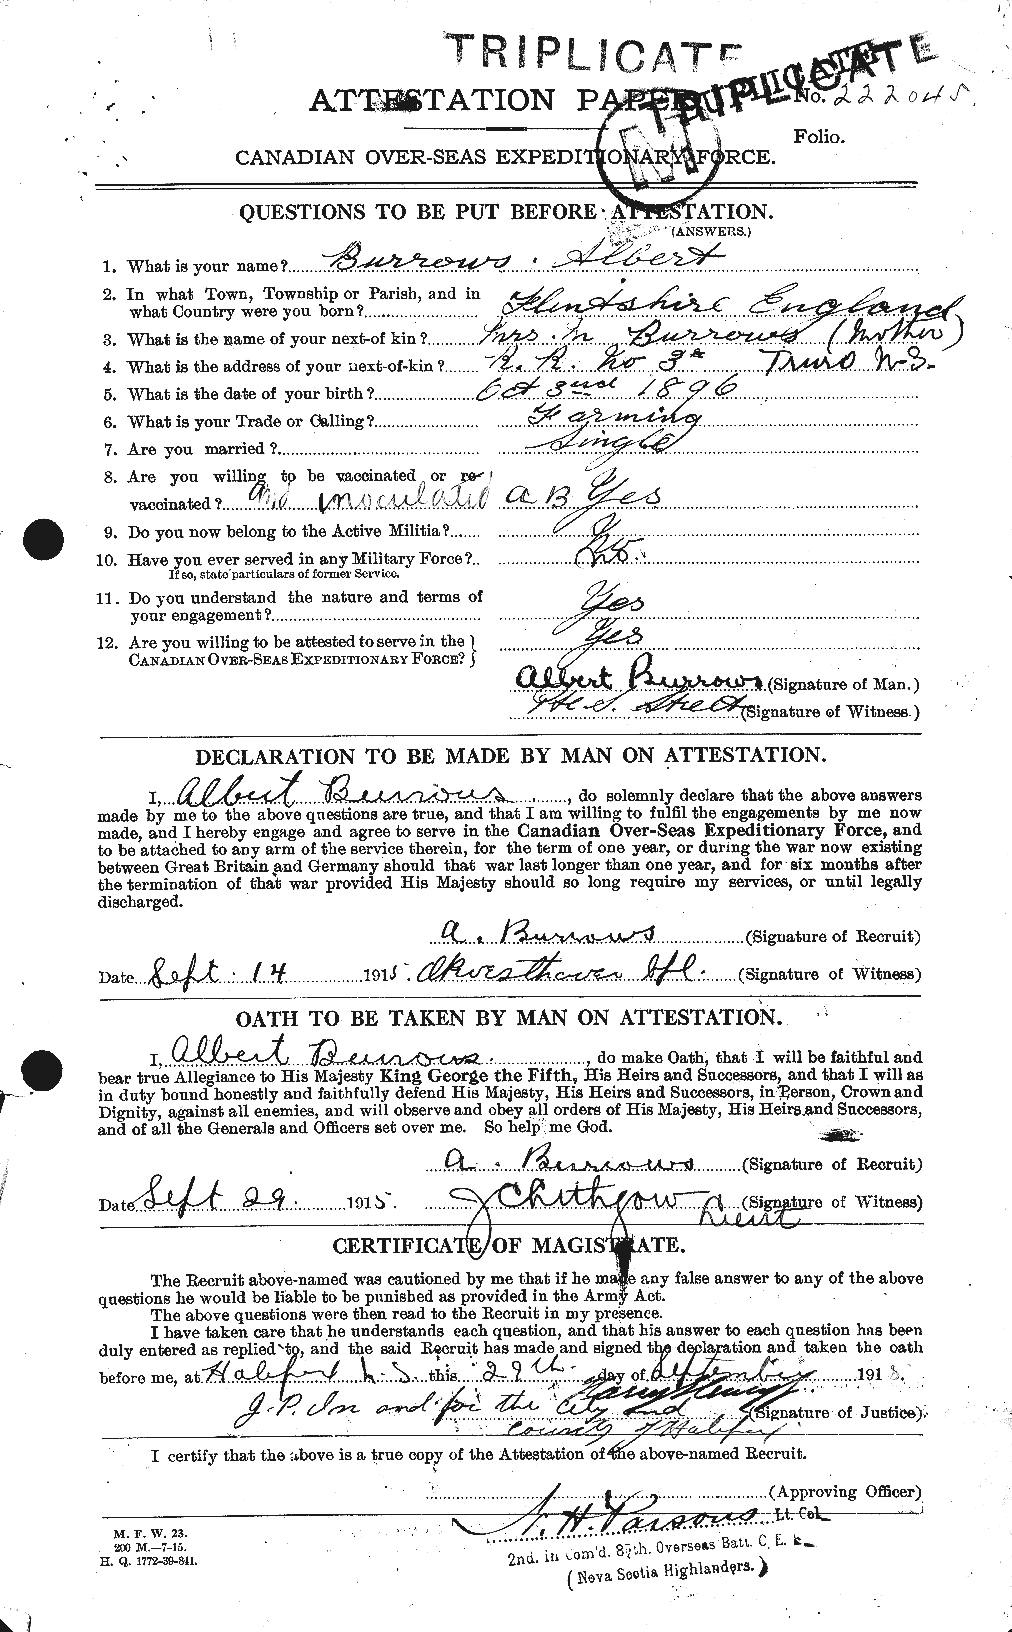 Personnel Records of the First World War - CEF 274759a